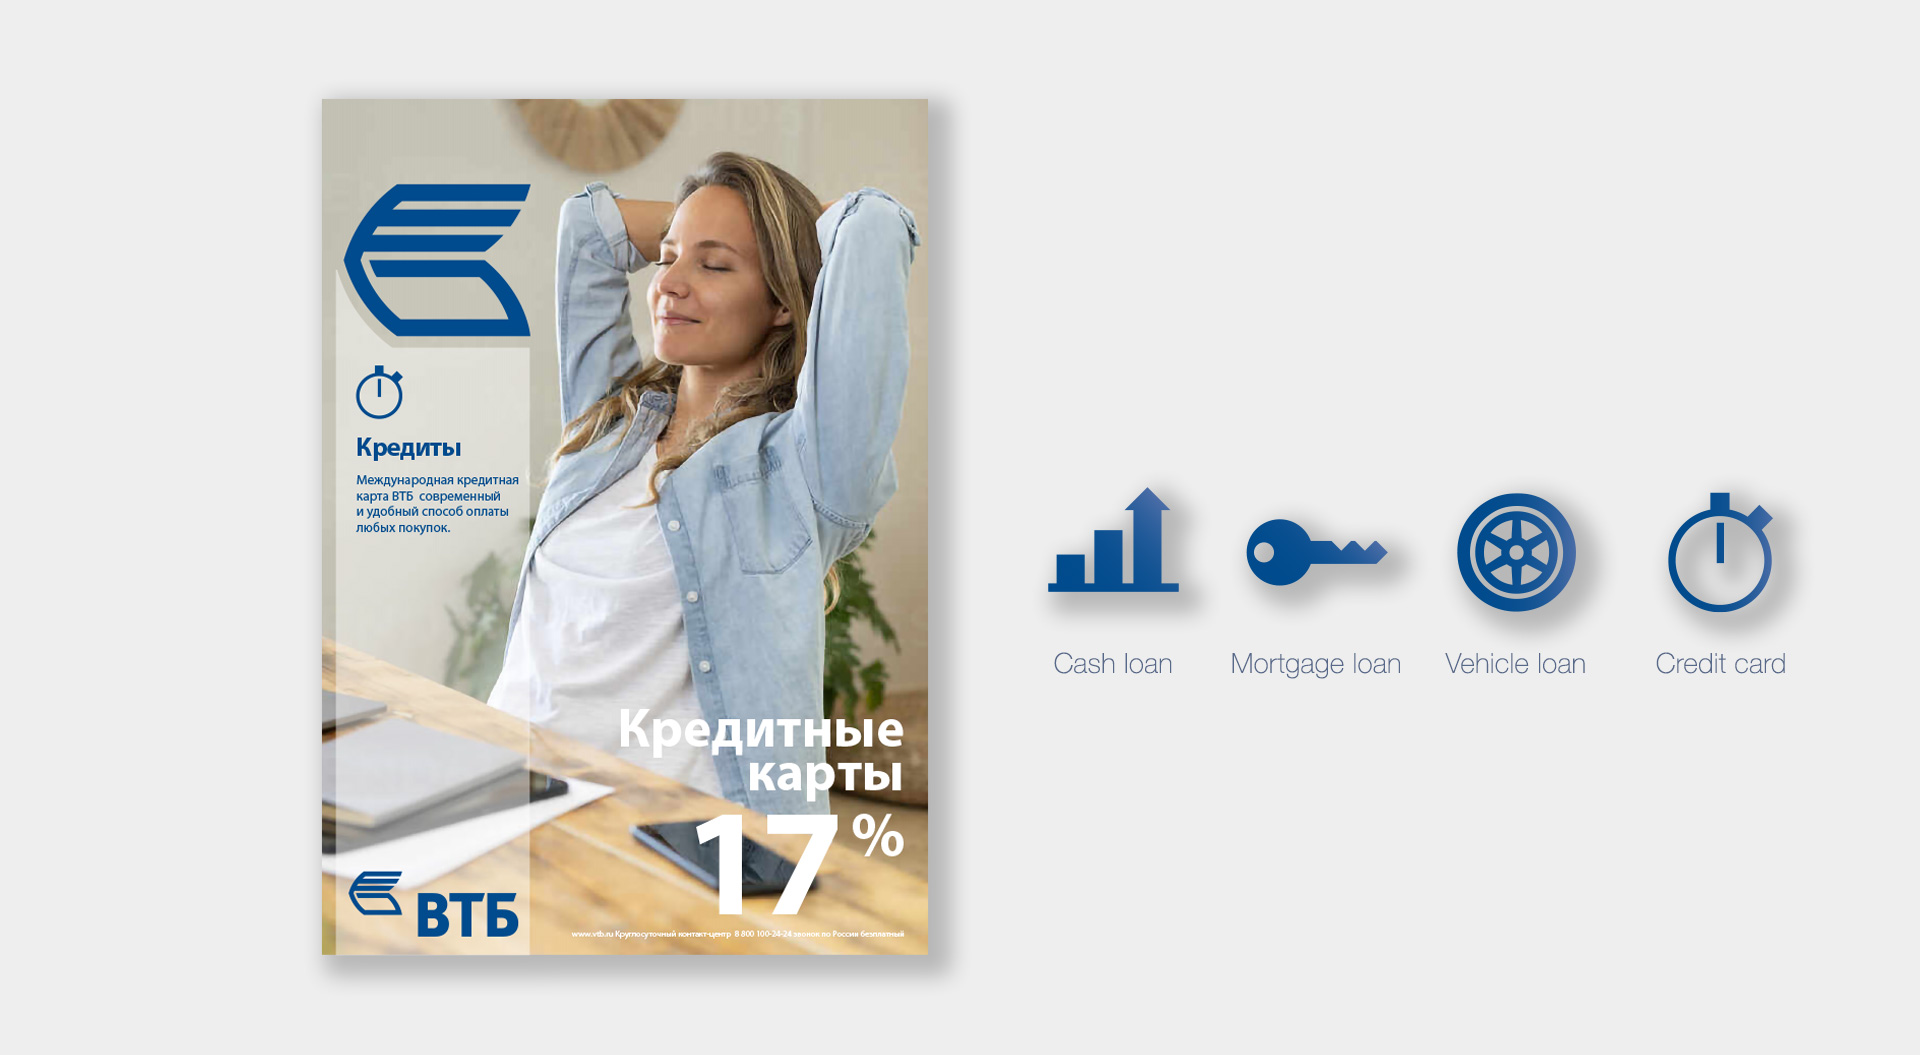 VTB Bank express branch and advertising communications and icon design of business services